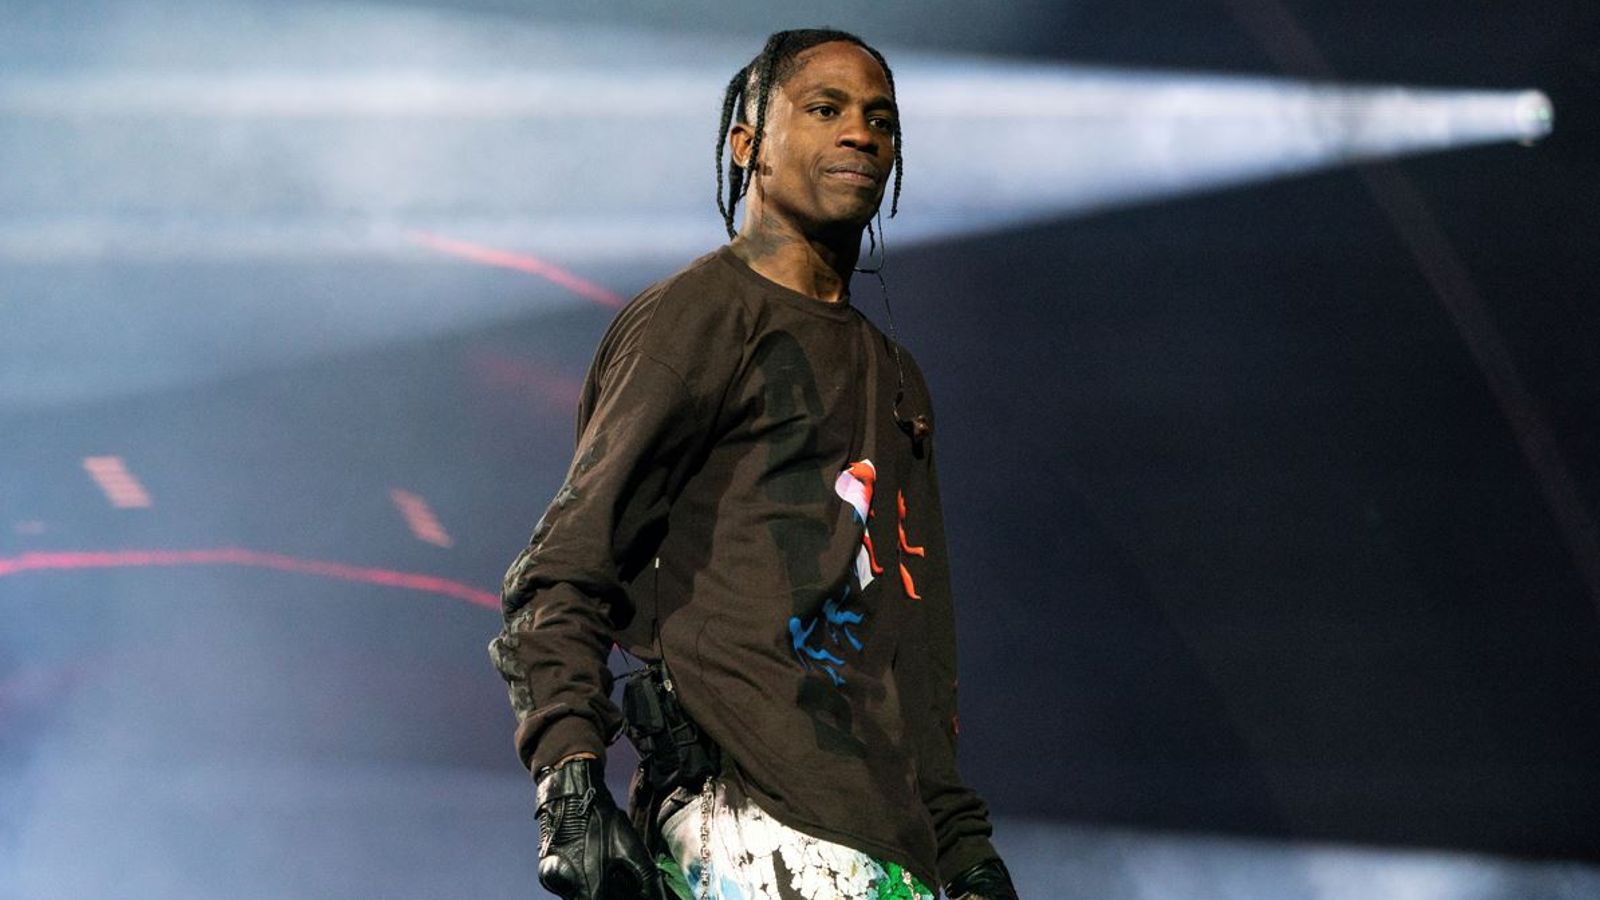 Travis Scott will not face criminal charges over deadly crowd crush at festival